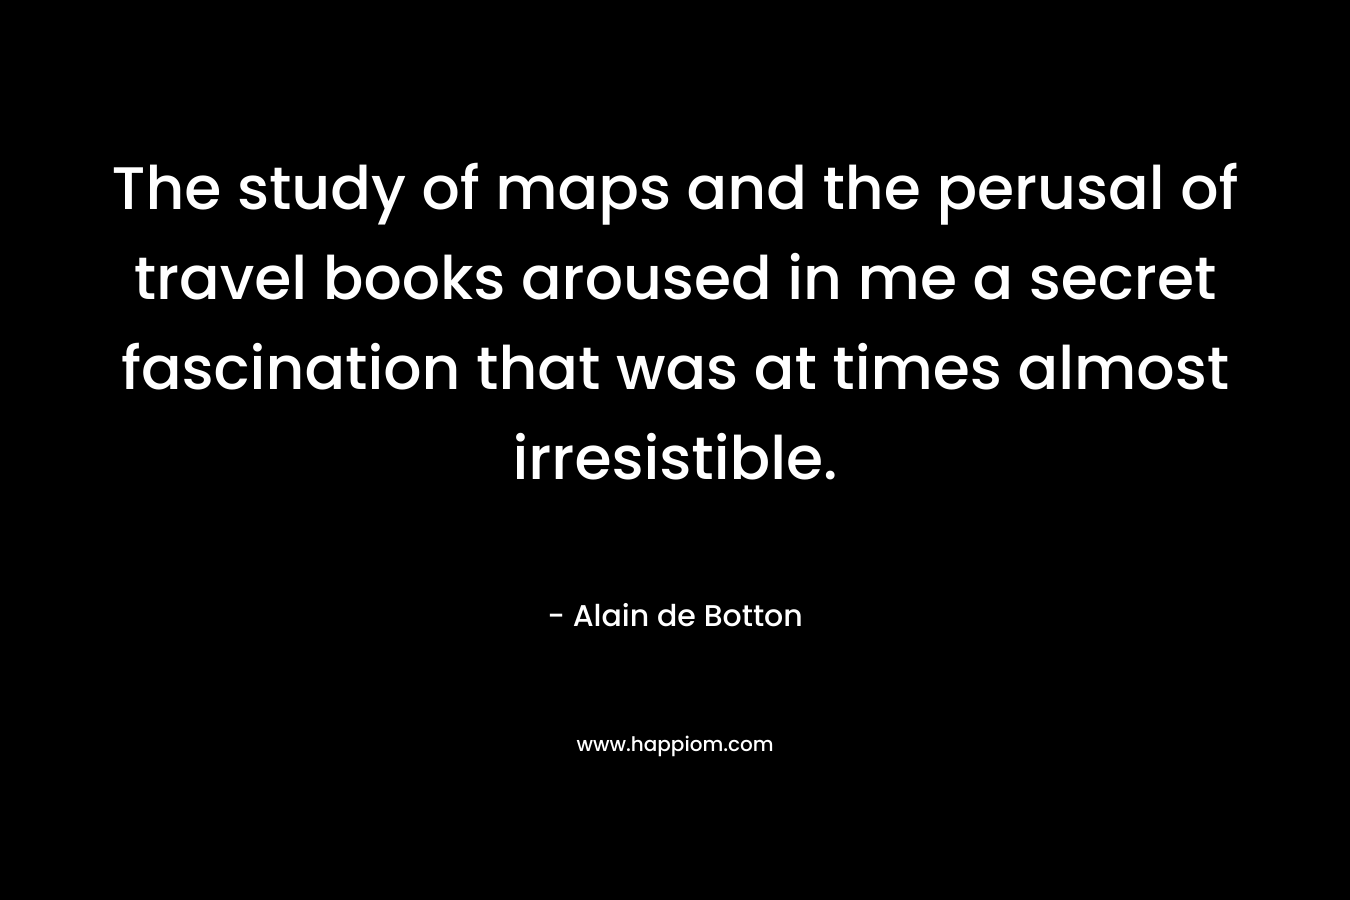 The study of maps and the perusal of travel books aroused in me a secret fascination that was at times almost irresistible.